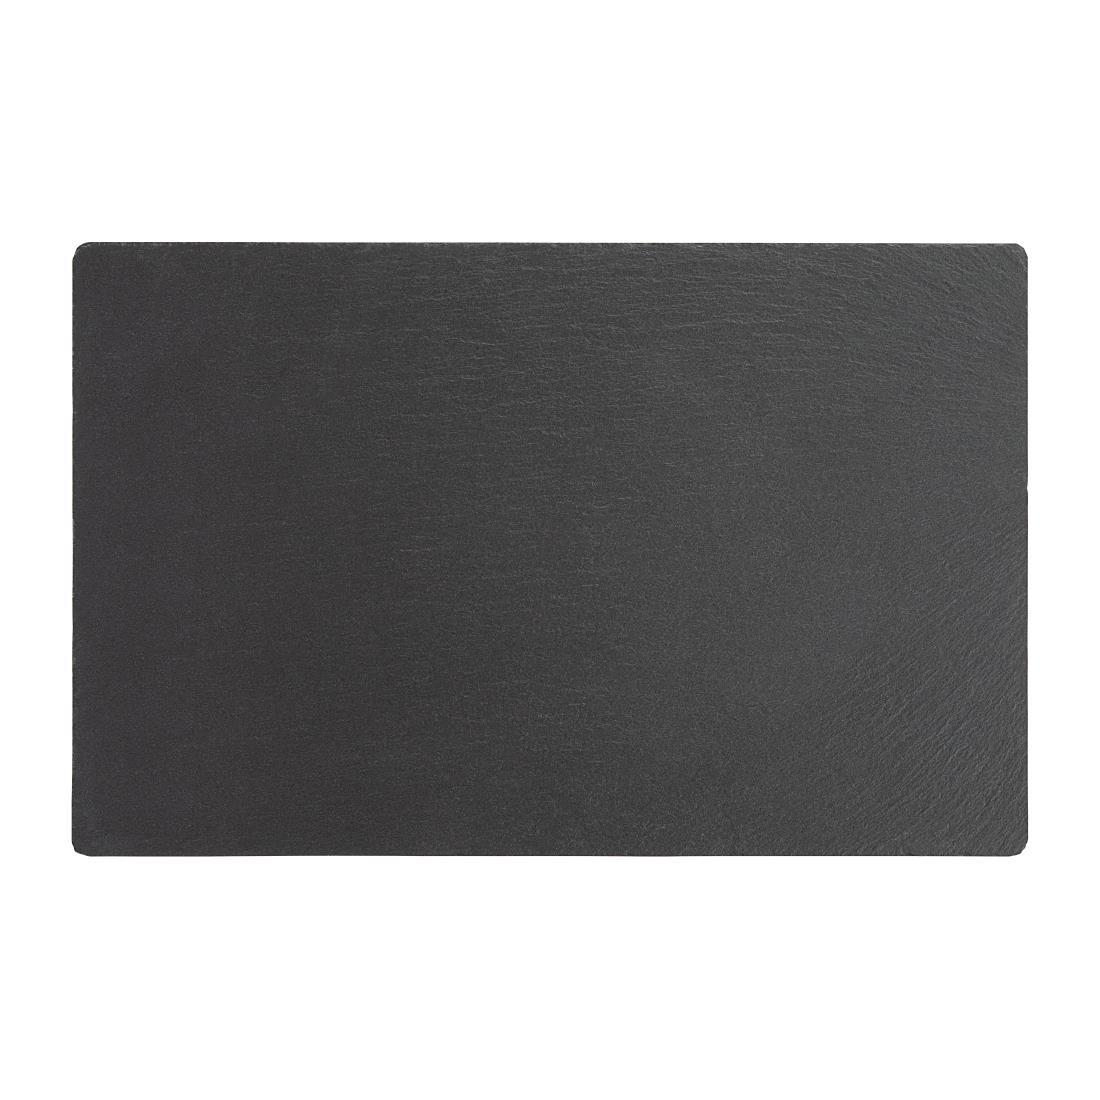 Olympia Smooth Edged Slate Platters 280 x 180mm (Pack of 2) - CM063  - 1